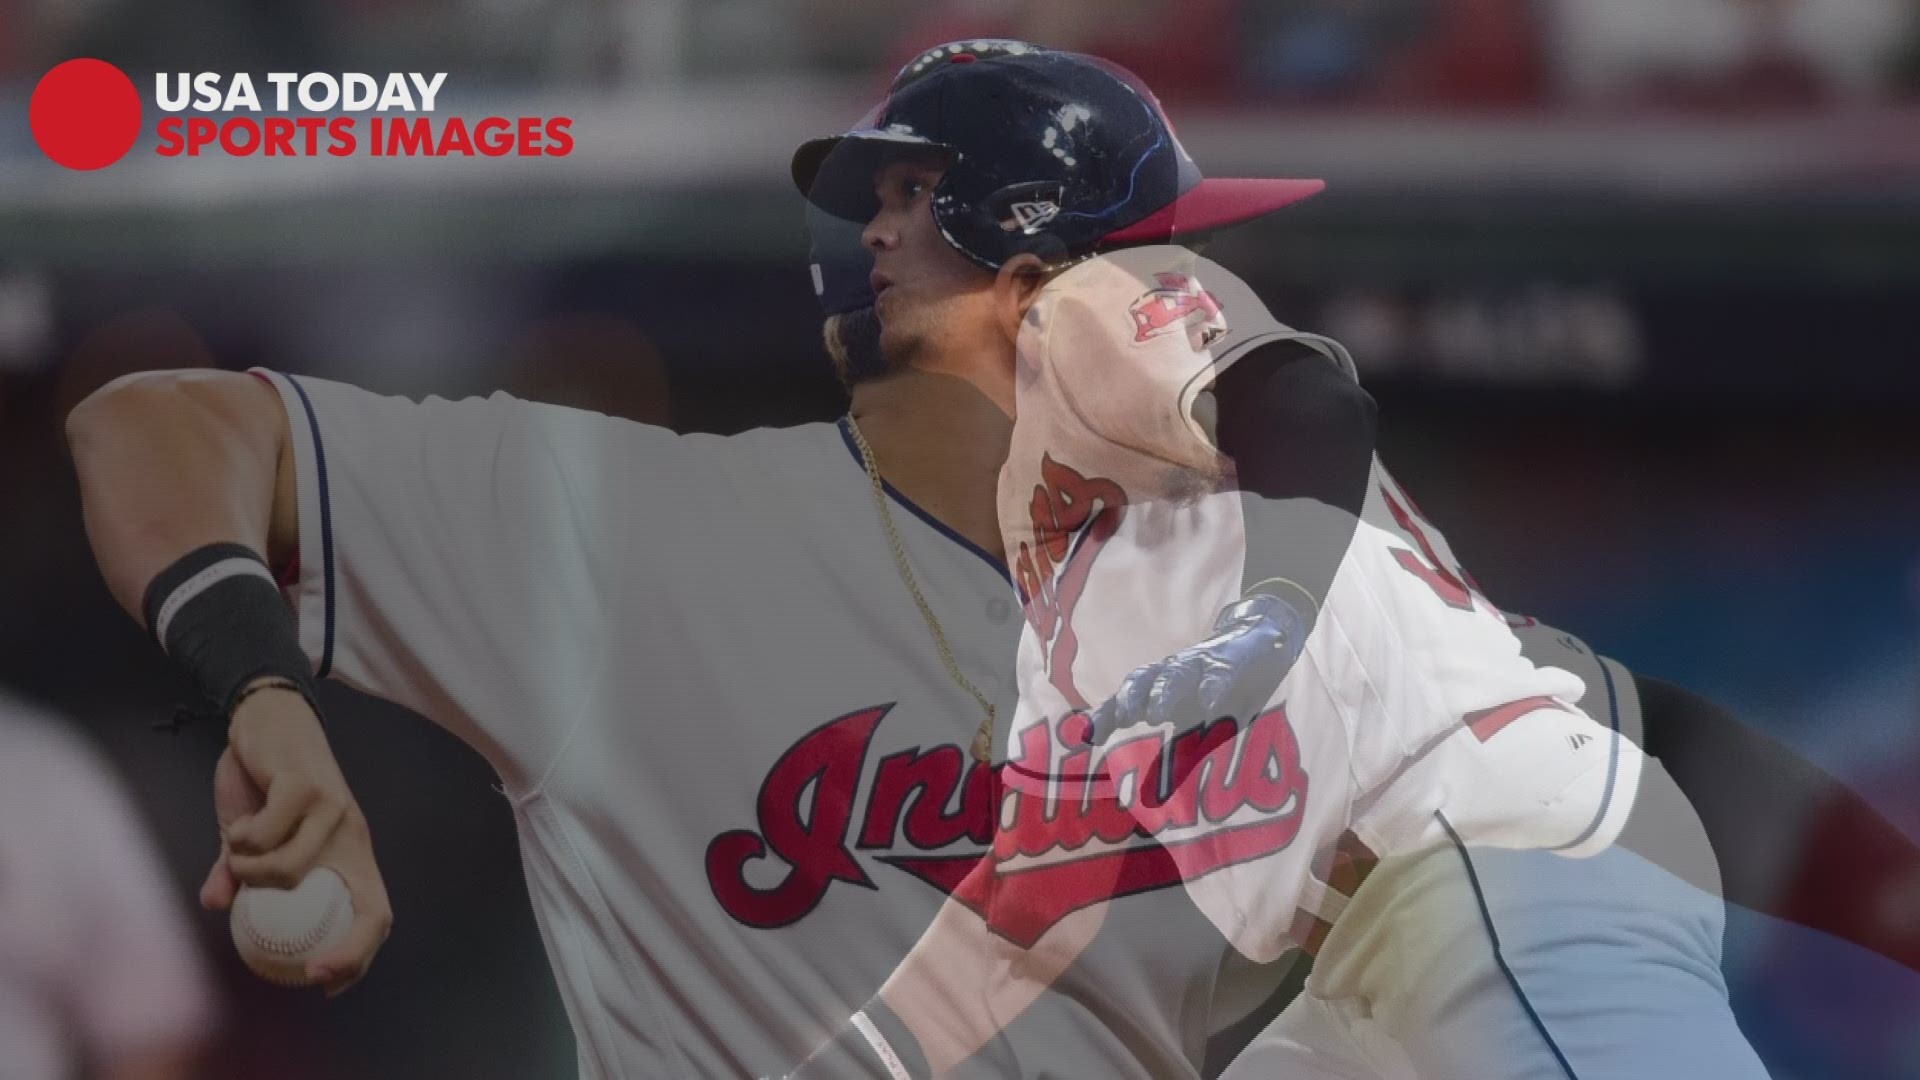 The Cleveland Indians traded infielder Giovanny Urshela to the Toronto Blue Jays for cash considerations or a player to be named.